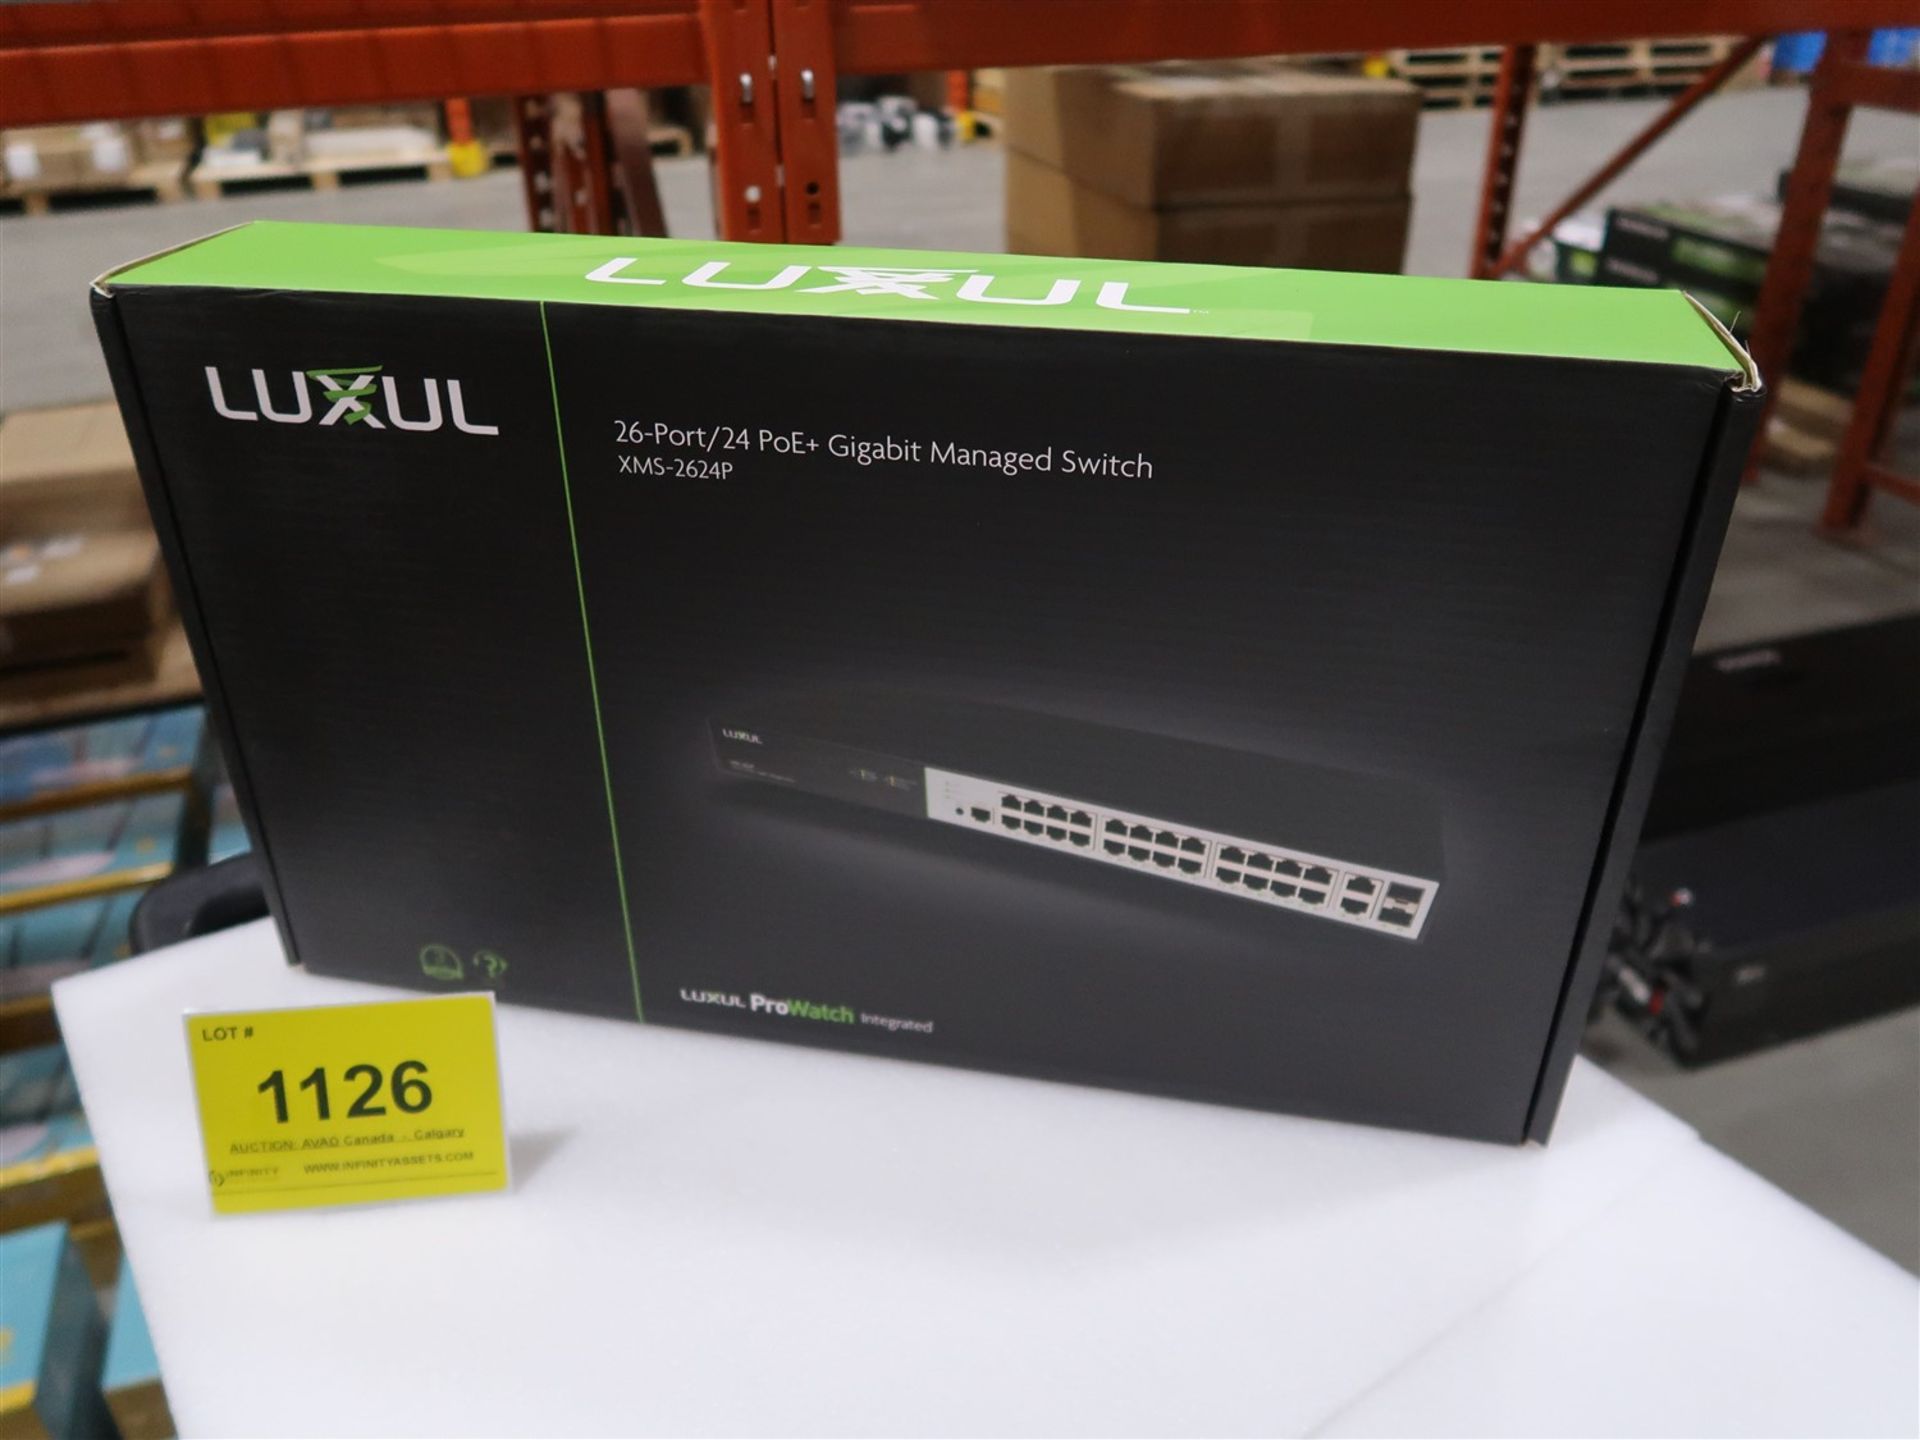 LUXUL 26 PORT/24 POE AND GIGABIT MANAGED SWITCH XMS-2624P, (BNIB) MSRP $1325